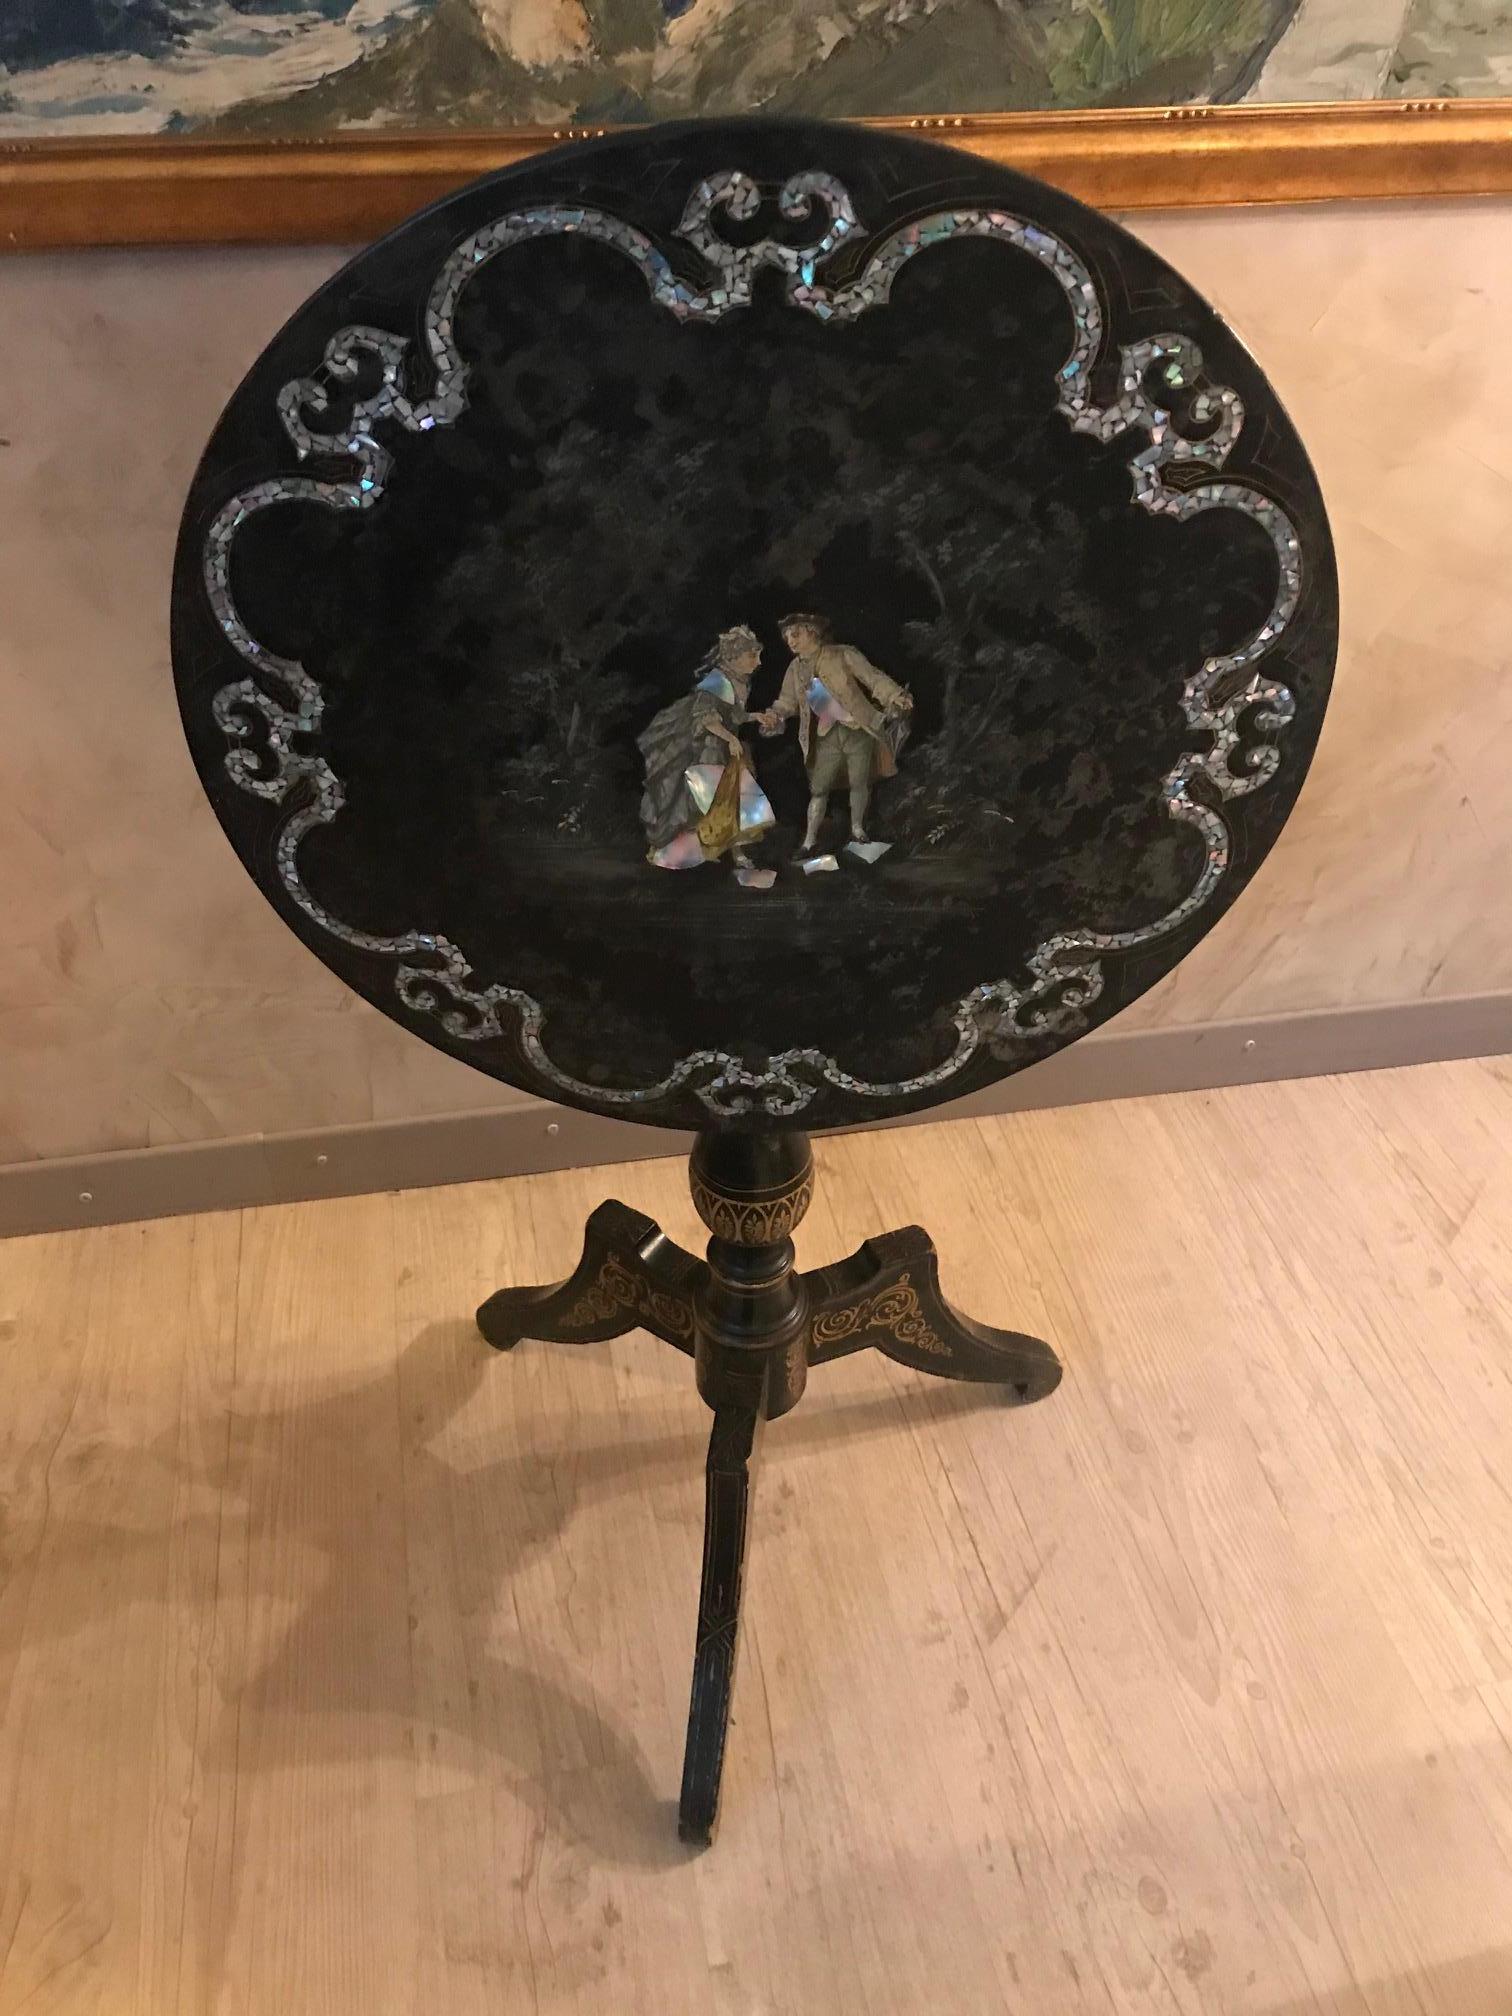 Very nice Napoleon III period Blackened pearwood and mother of pearl inlay foldin Gueridon from the 1870s. 
The base has a nice gilt marquetry and the top is made with mother of pearl inlay and we can see on the center a couple with also